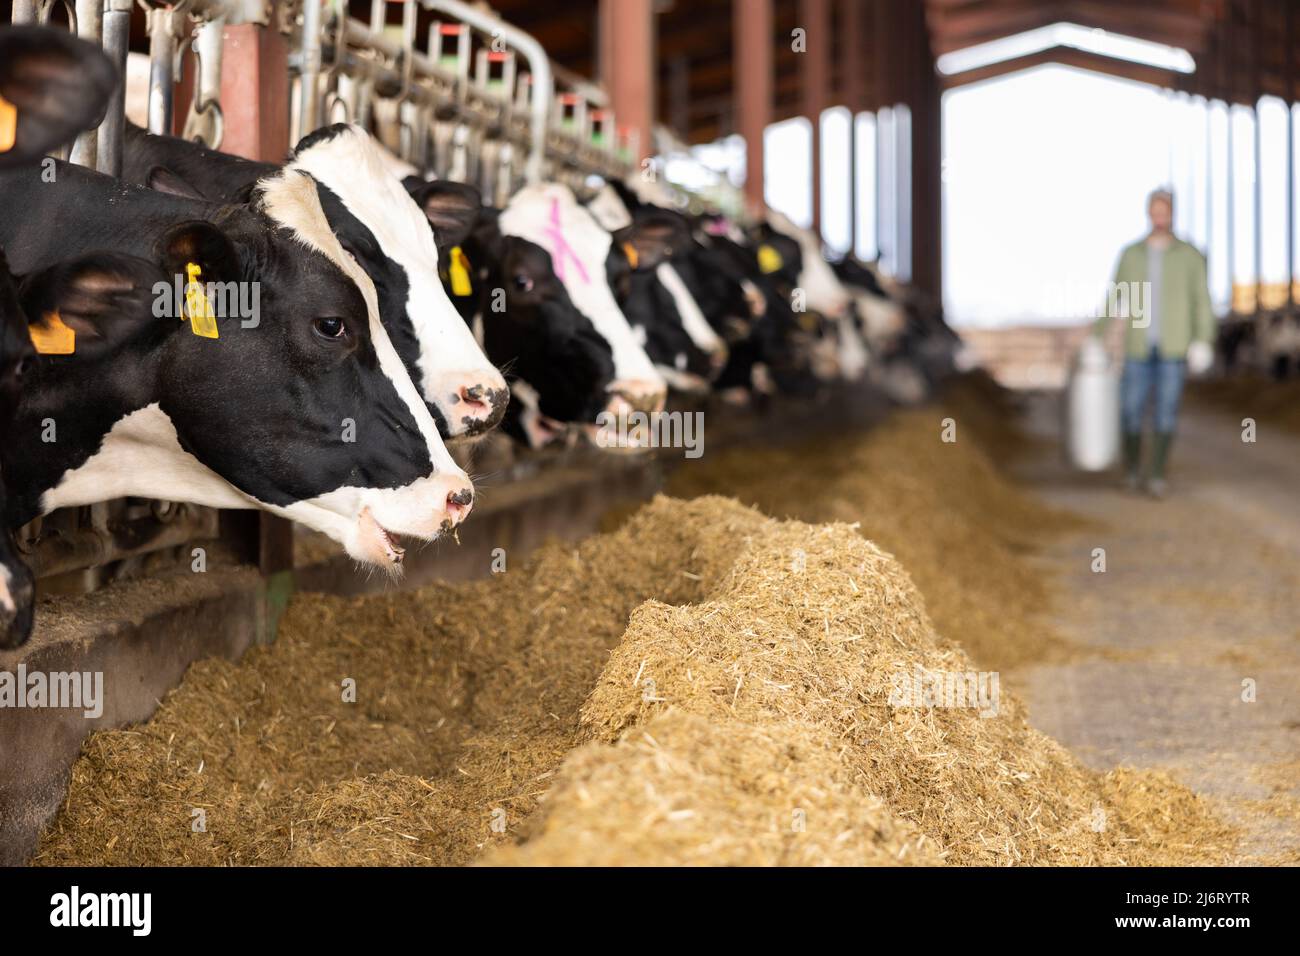 Cows eating cattle food in dairy farm Stock Photo